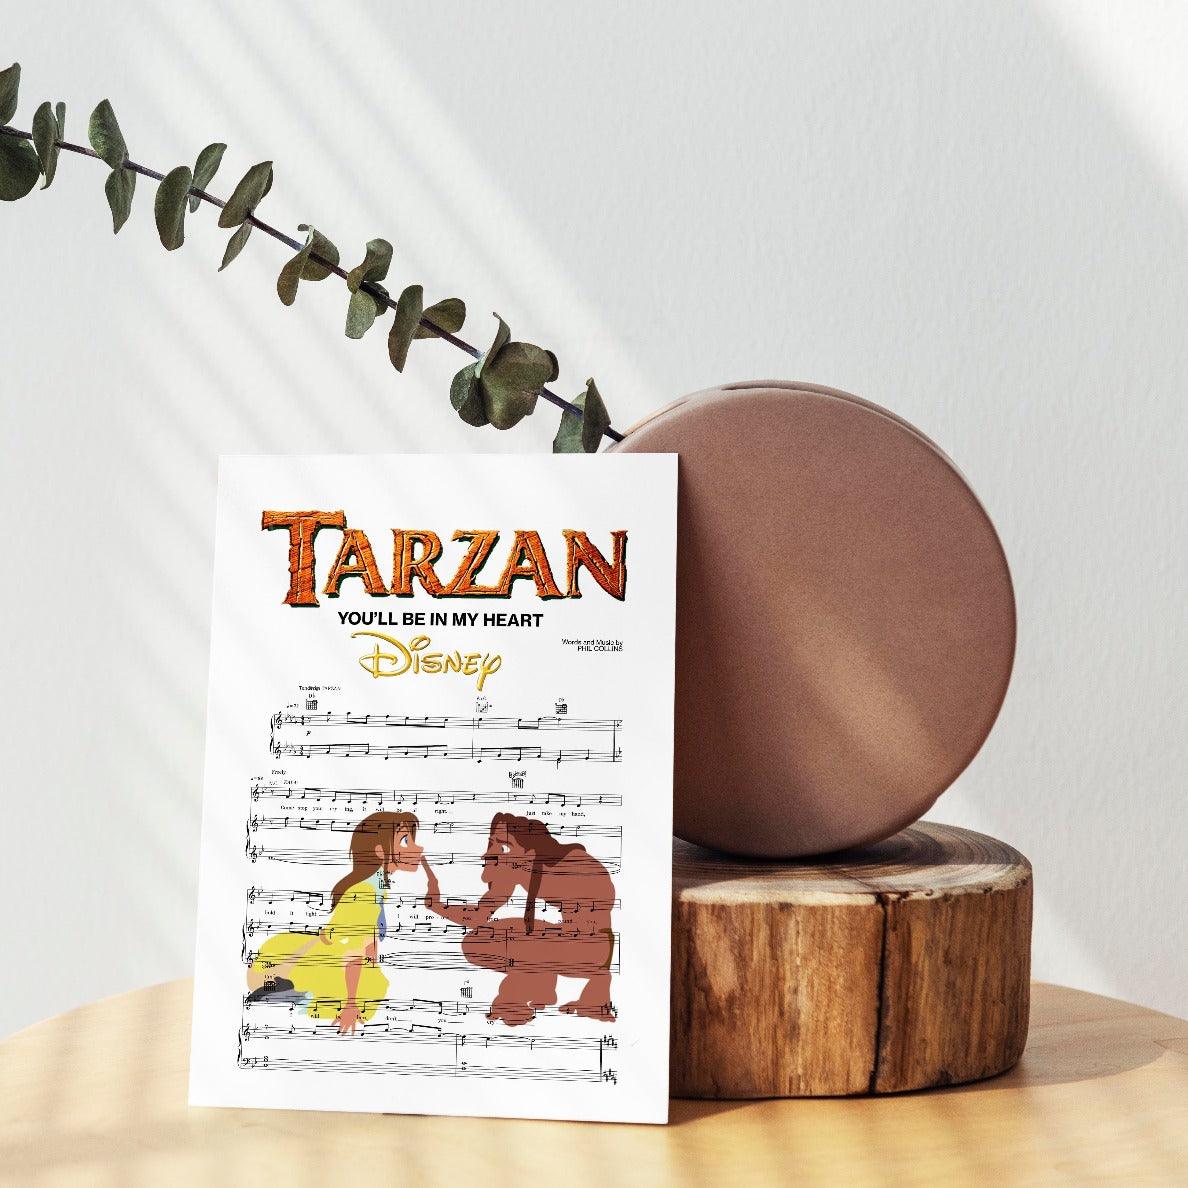 Looking for a piece of art that will transport you to a different time and place? Look no further than our Tarzan - YOU’LL BE IN MY HEART Print.This beautiful print is based on the classic Disney song, and is the perfect addition to your home decor. It’s perfect for fans of Disney movies and music, and would make a great gift for any occasion.So why not add a little Disney magic to your home today? Order your Tarzan - YOU’LL BE IN MY HEART Print now.